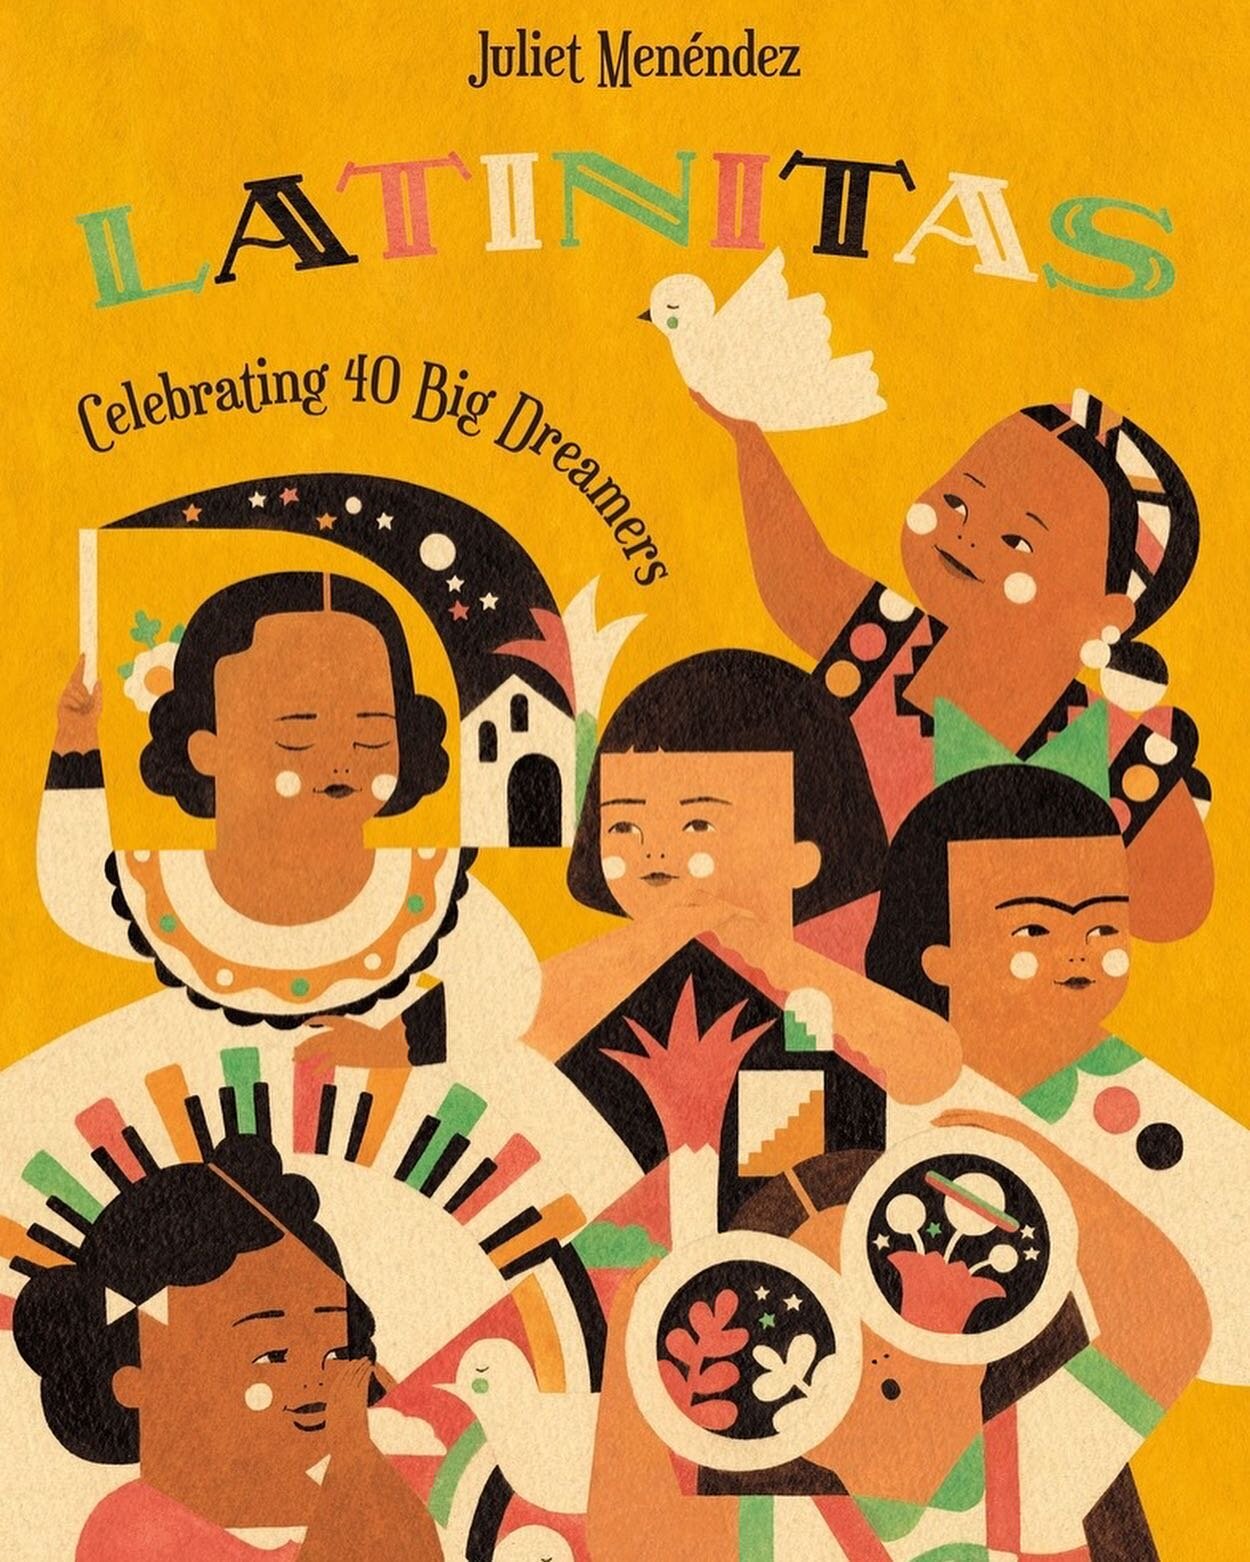 Author and Illustrator, Juliet Menéndez 📚🎨⁠ has published &quot;Latinitas&quot; a book filled with how 40 influential Latinas became the women we celebrate today! SWIPE to see some of the Latinas featured ➡️ 

&quot;In making the cover, I wanted to celebrate this amazing community of Latinas who are inspiring leaders and advocates of change and am so happy to share it with you. I can't believe that this project I have been dreaming about since 2014 is finally coming to life! As Selena would say, estoy MUY excited!&quot; - @jmenendezillu (@mackidsbooks) 

#WAGregram #Latinitas #JulietMenéndez